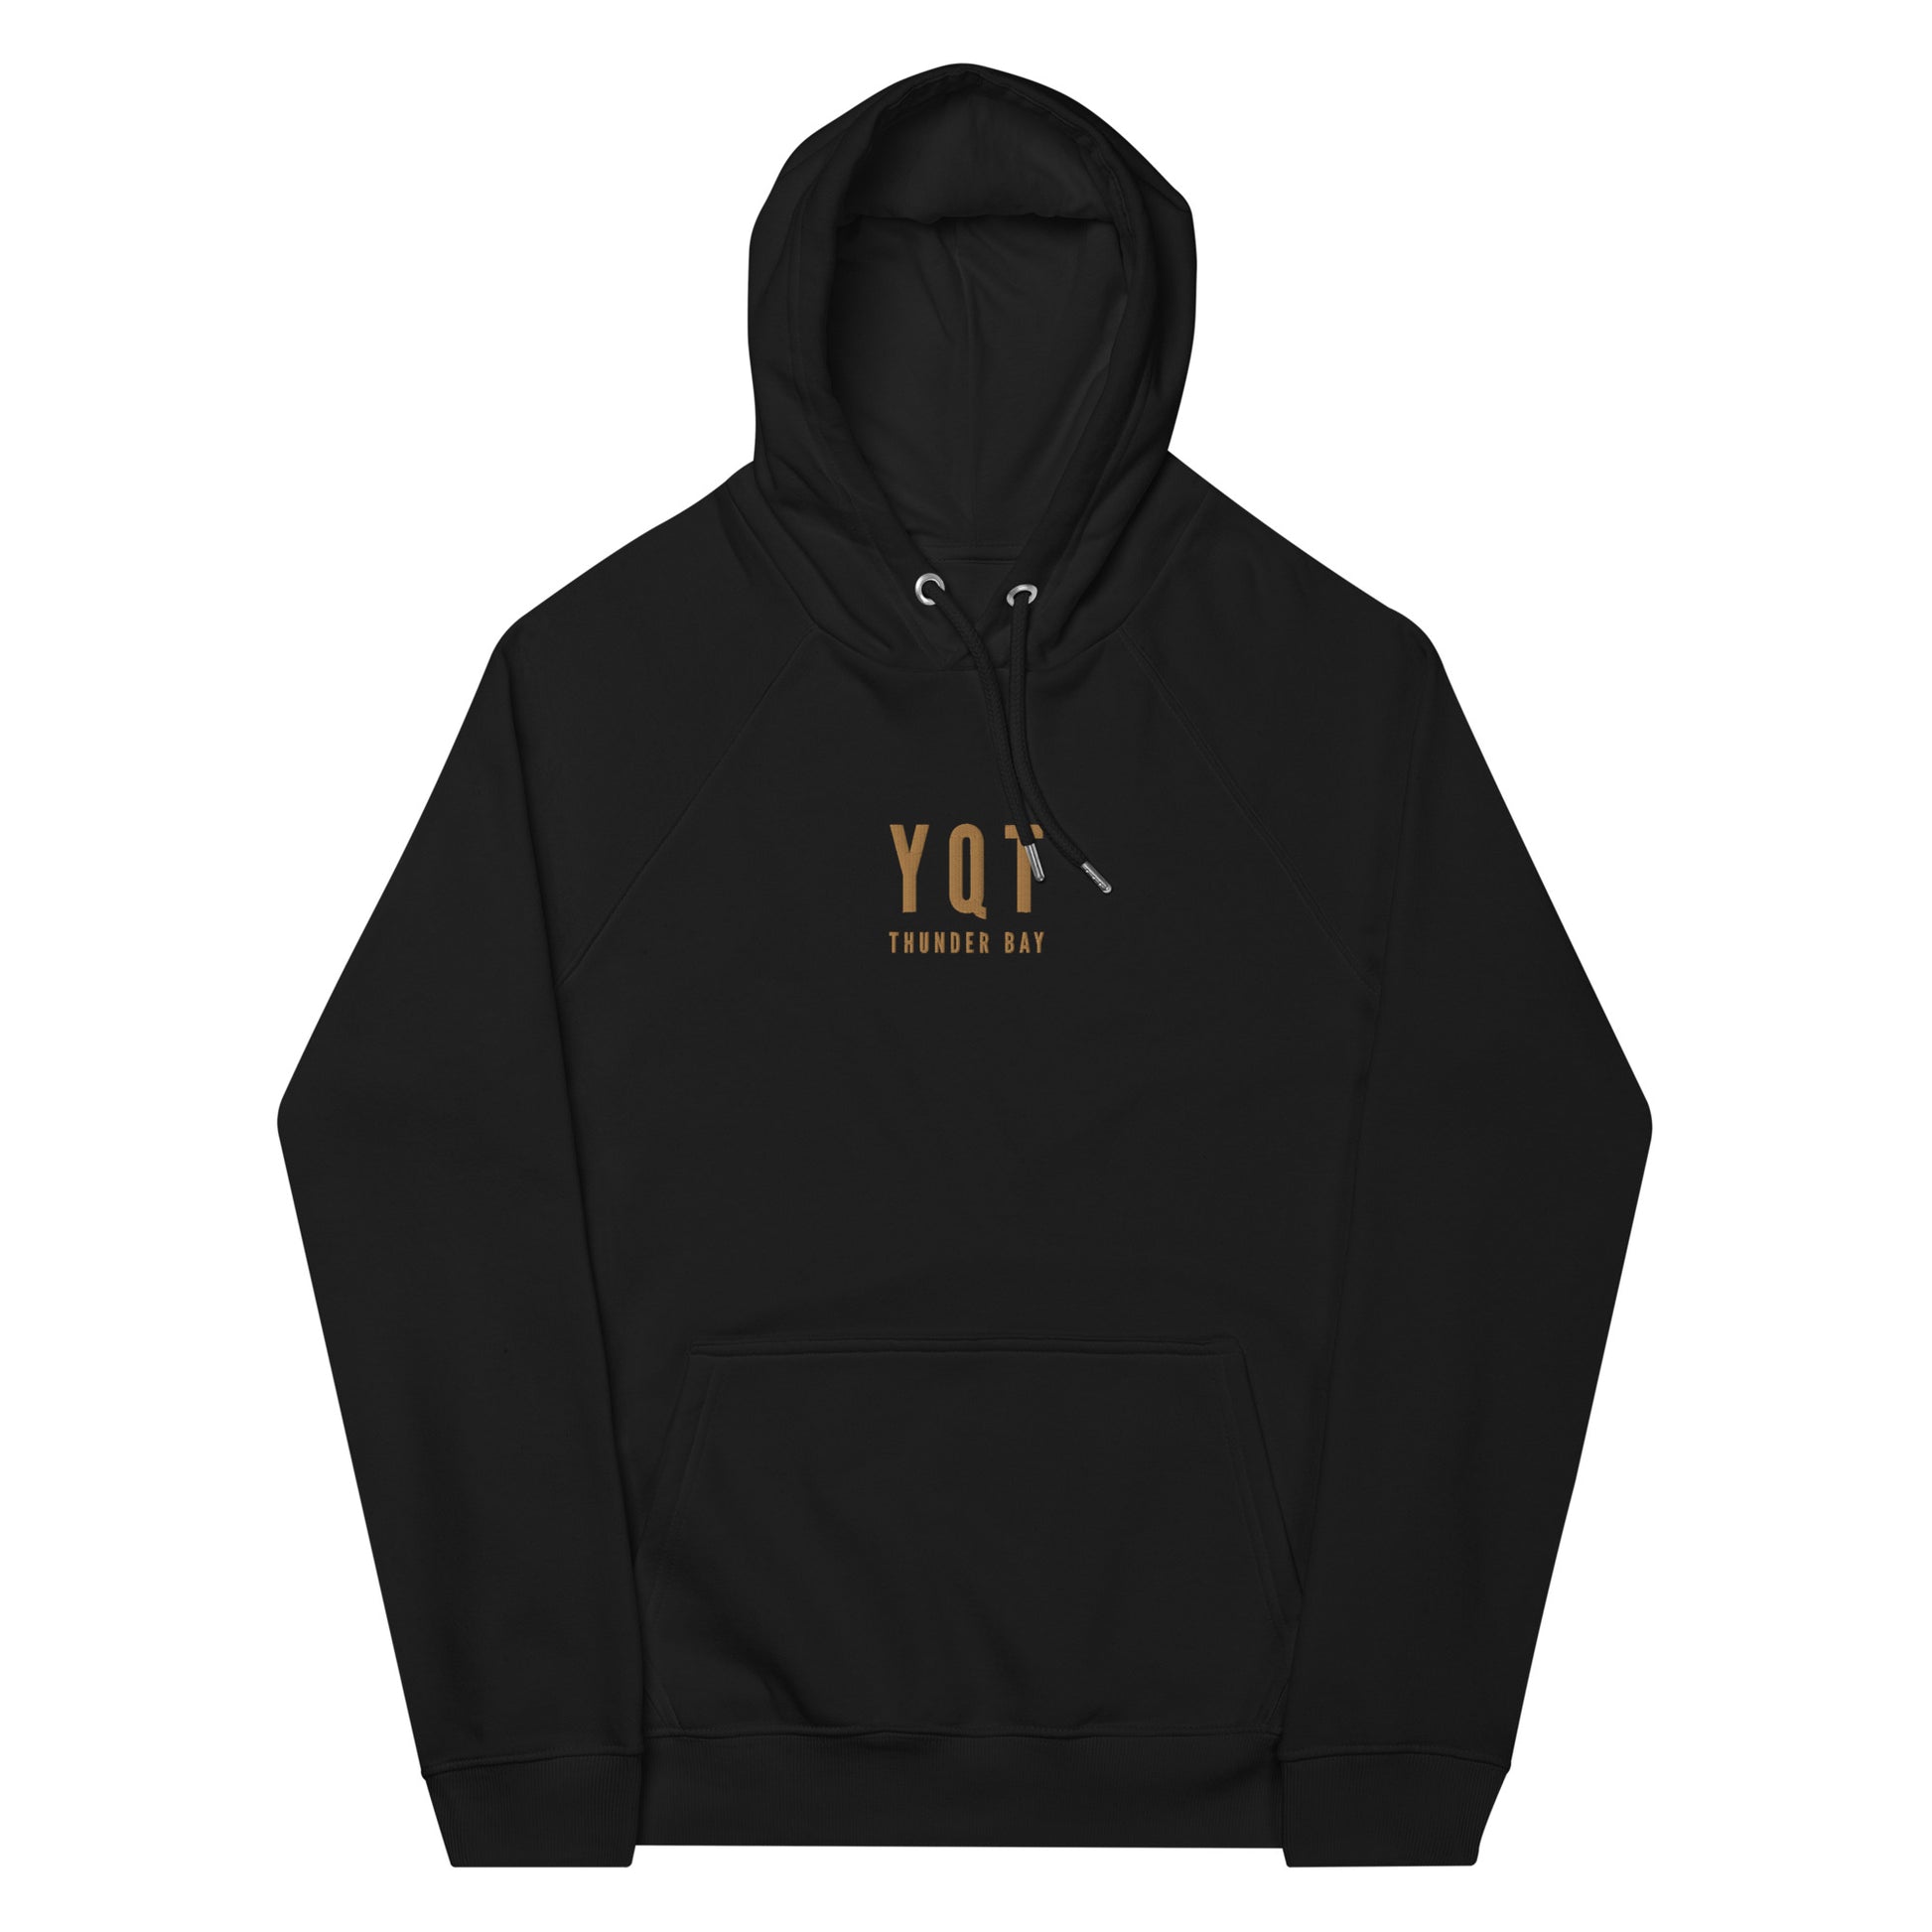 City Organic Hoodie - Old Gold • YQT Thunder Bay • YHM Designs - Image 10